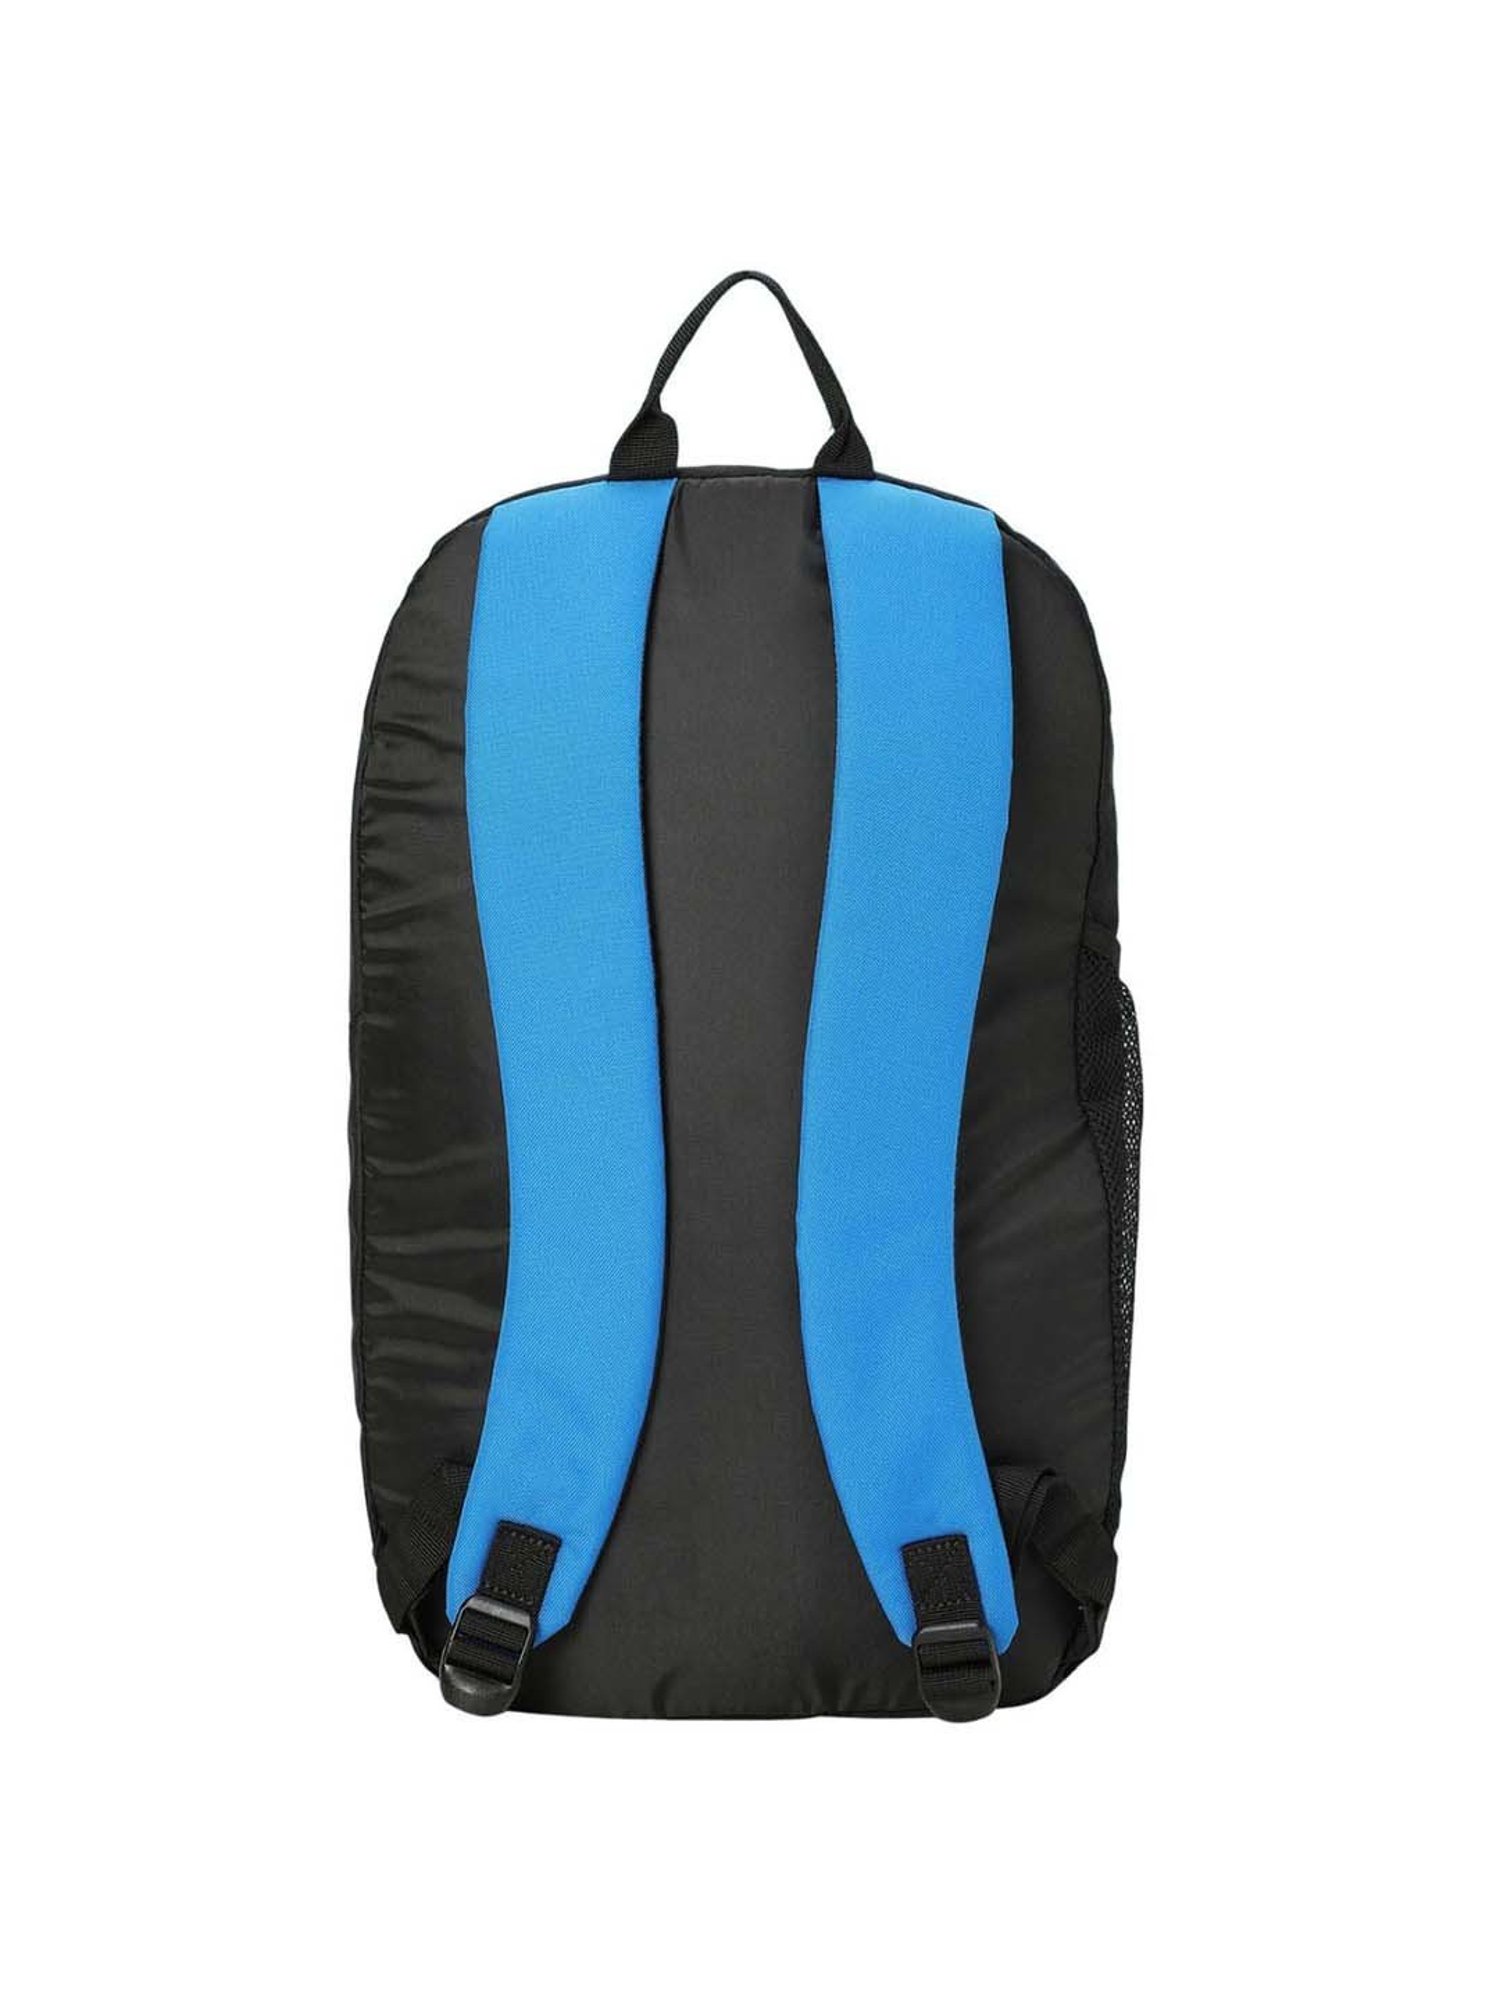 Buy NewFeel Abeona 14L Bag (Blue) Online at Low Prices in India - Amazon.in